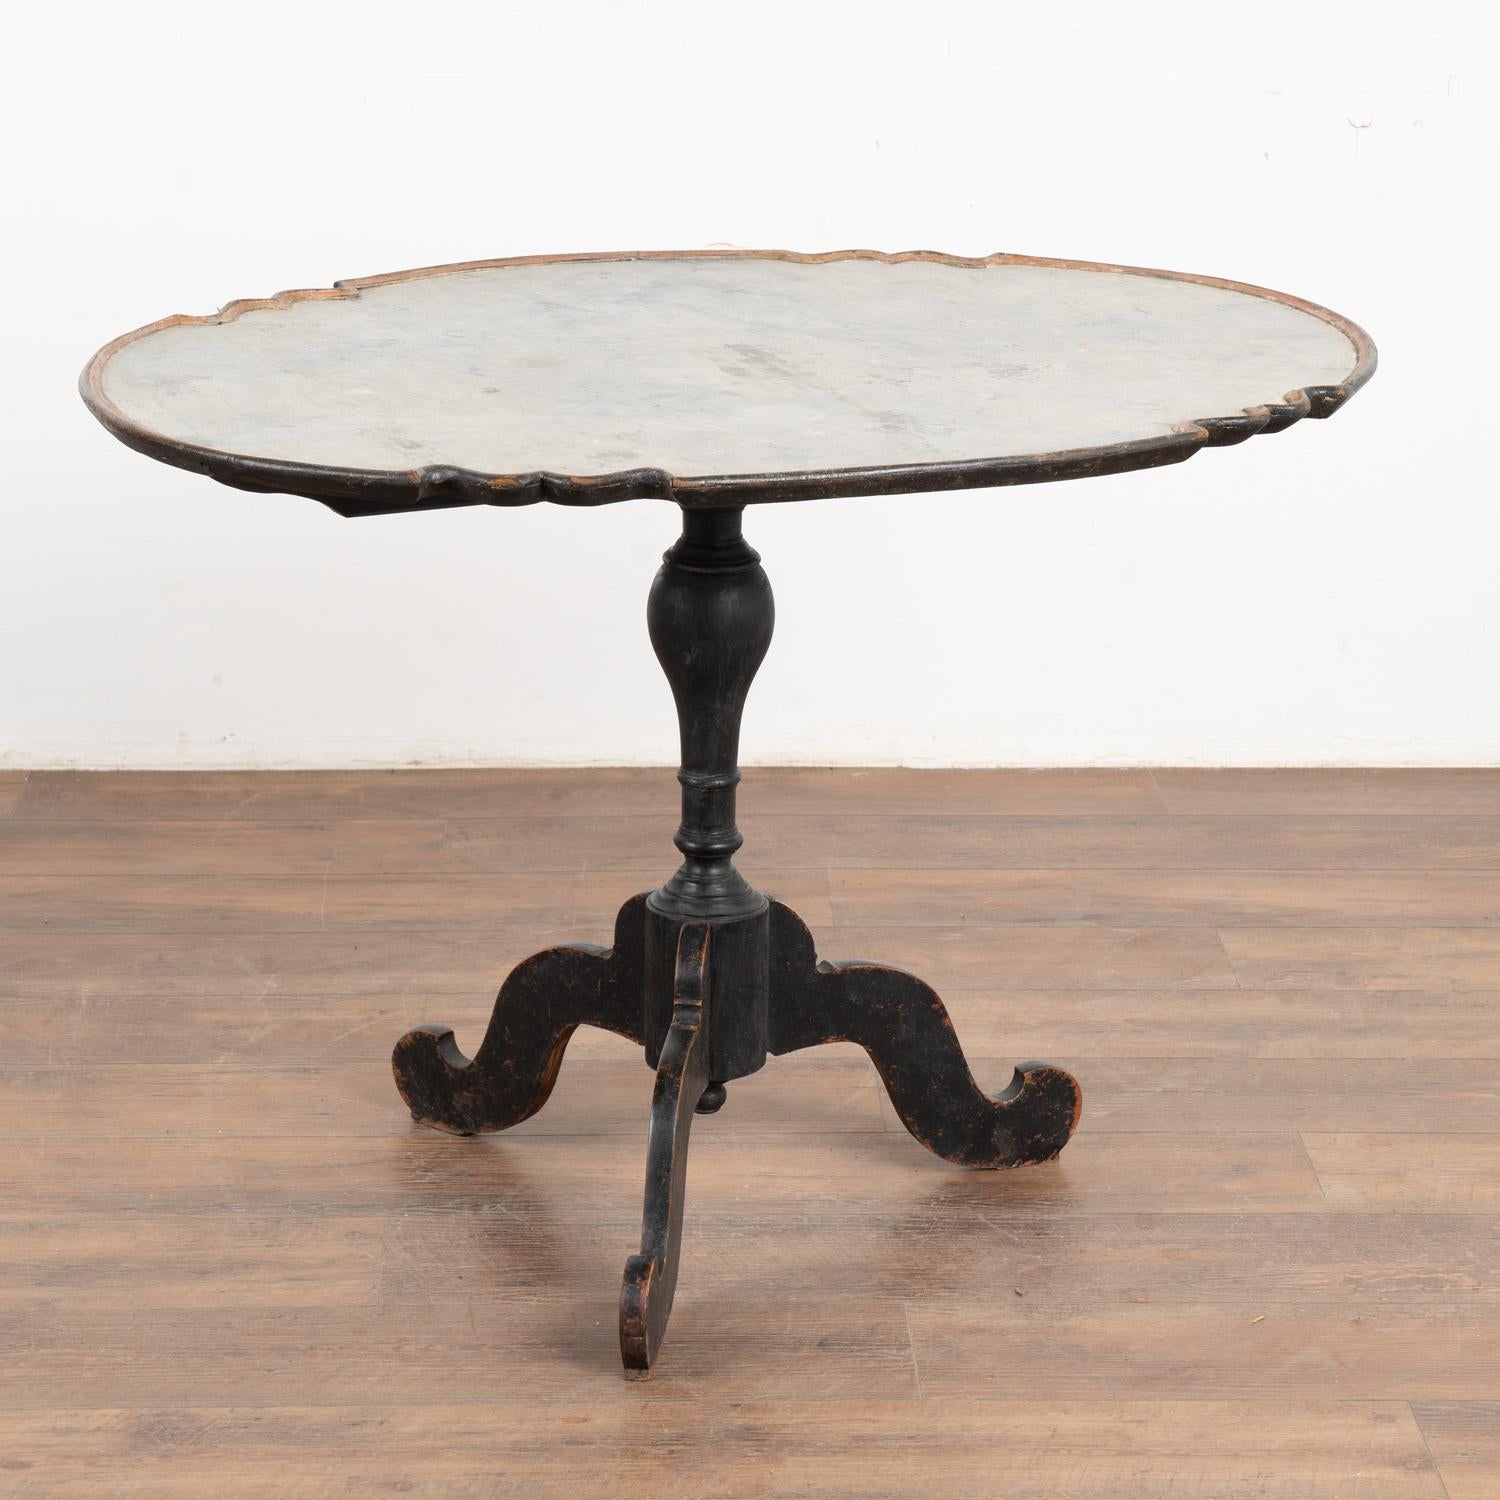 The aged patina of the original black paint accentuates the curves and grace of this Rococo tilt top side table. Note the top was hand painted with a traditional faux marble finish in varied layers of light blue, white and gray.
The black painted